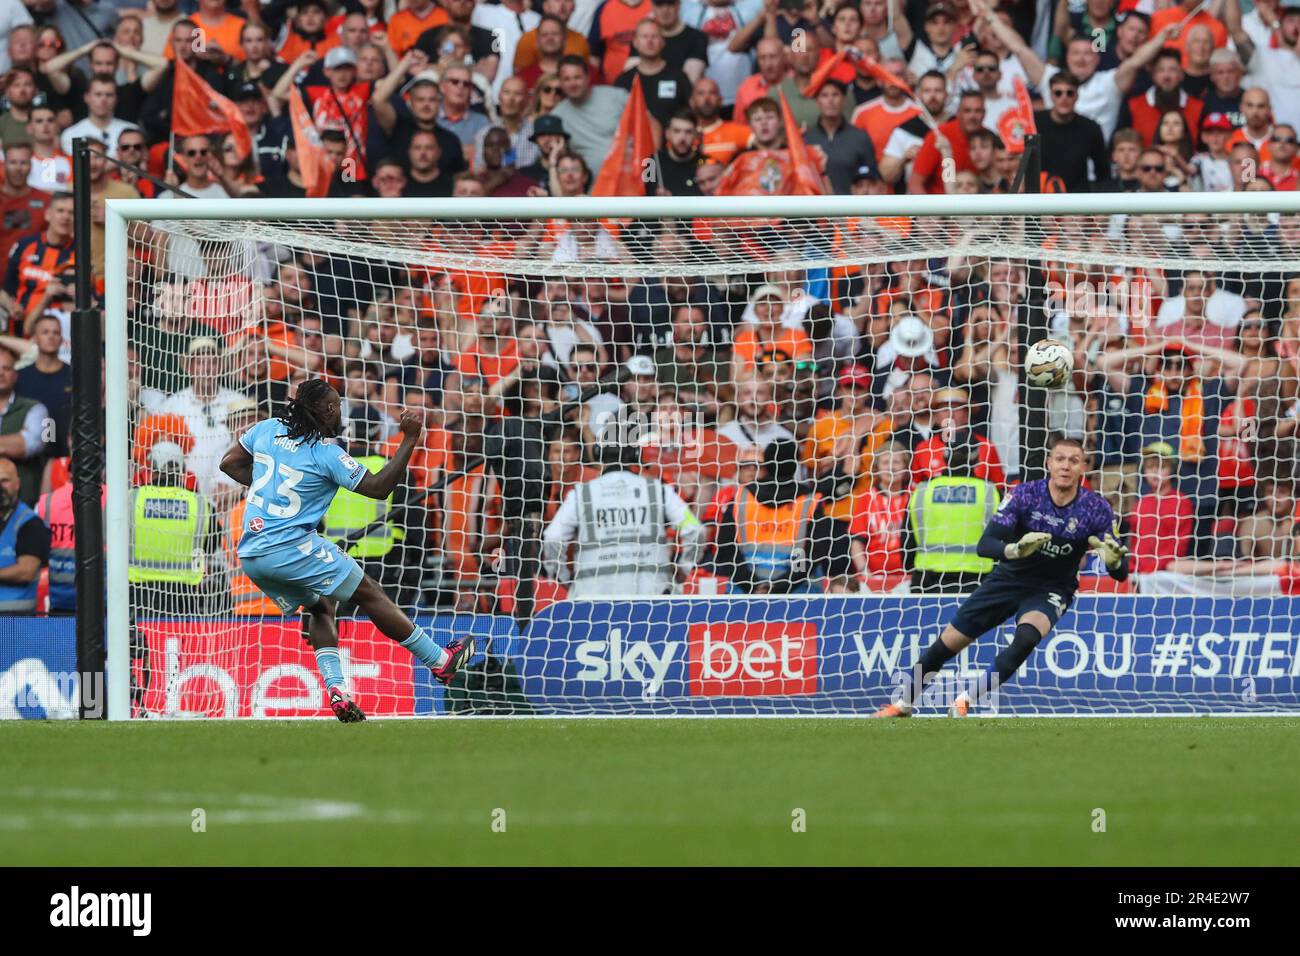 Fankaty Dabo #23 of Coventry City misses during the penalty shootout during the Sky Bet Championship Play-Off Final match Coventry City vs Luton Town at Wembley Stadium, London, United Kingdom, 27th May 2023  (Photo by Gareth Evans/News Images) Stock Photo